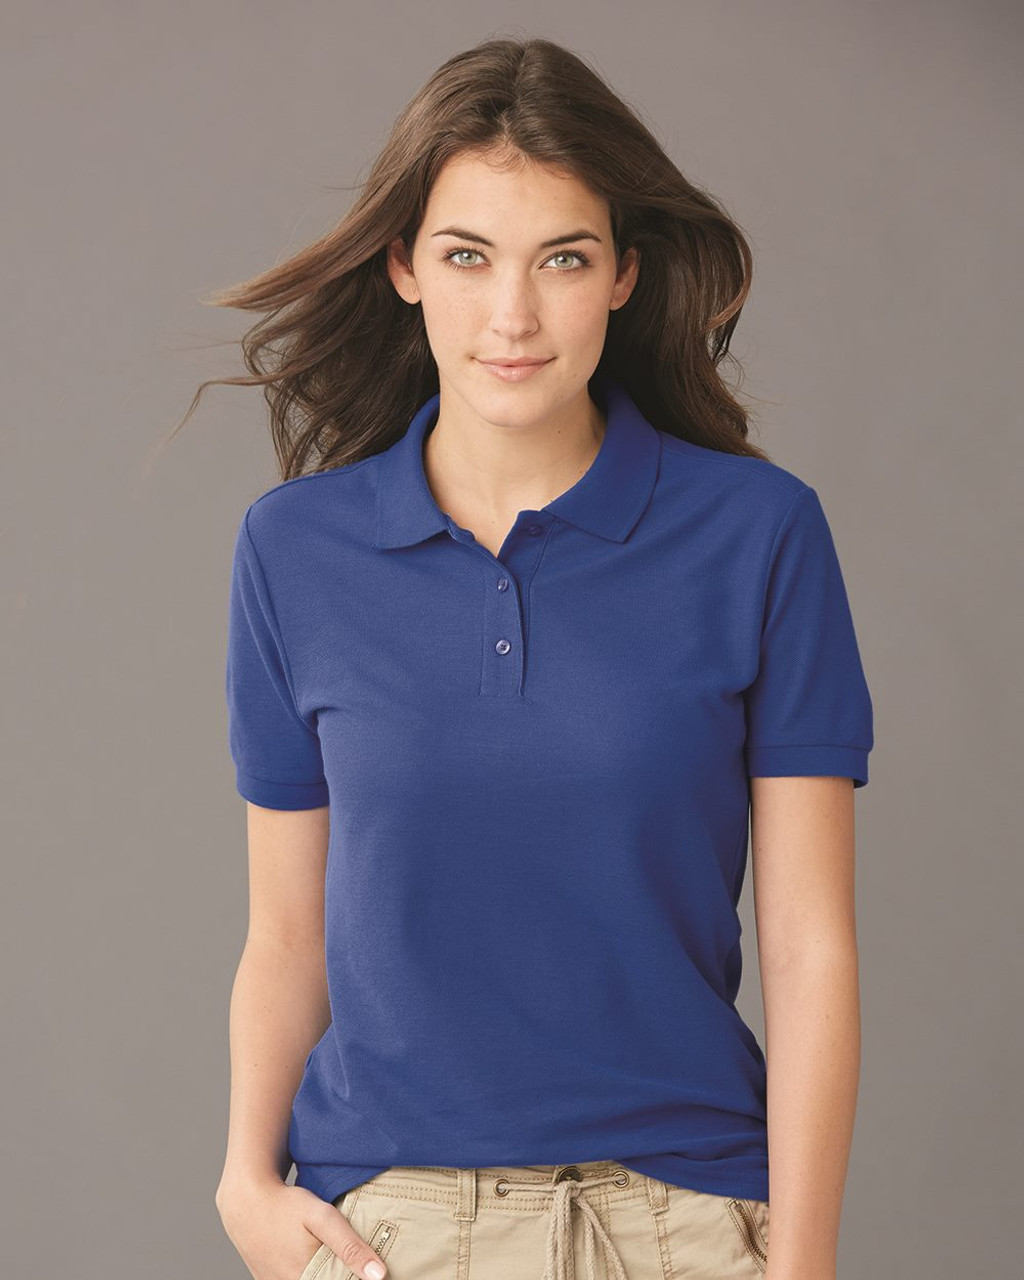 Embroidered Women's Easy Care Piqué Polo - 537WR